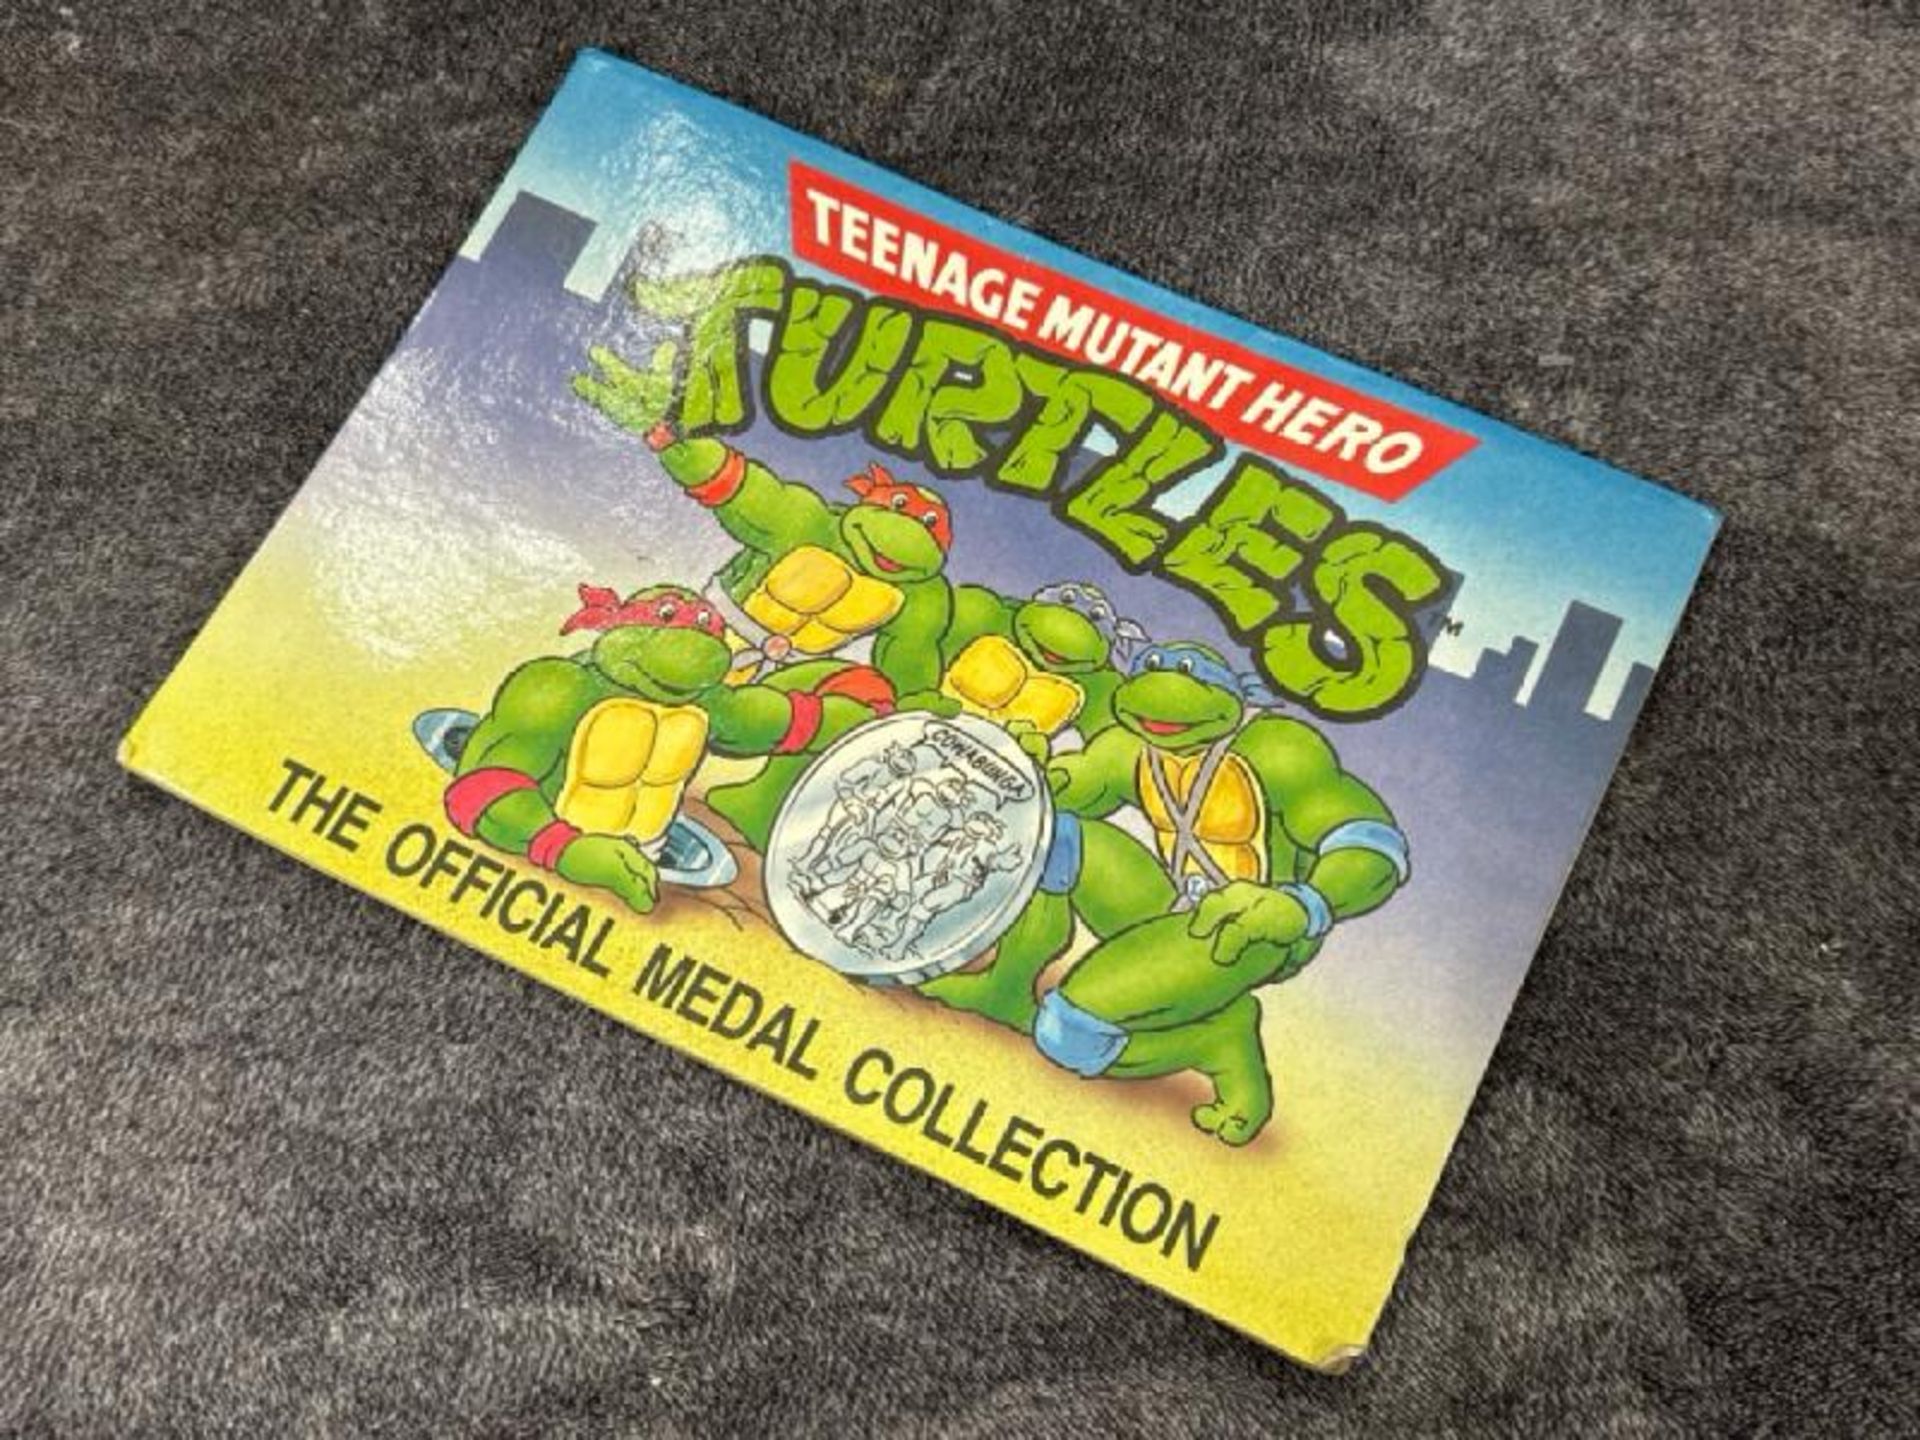 Teenage Mutant Hero Turtles official medal coin collection, complete / AN44